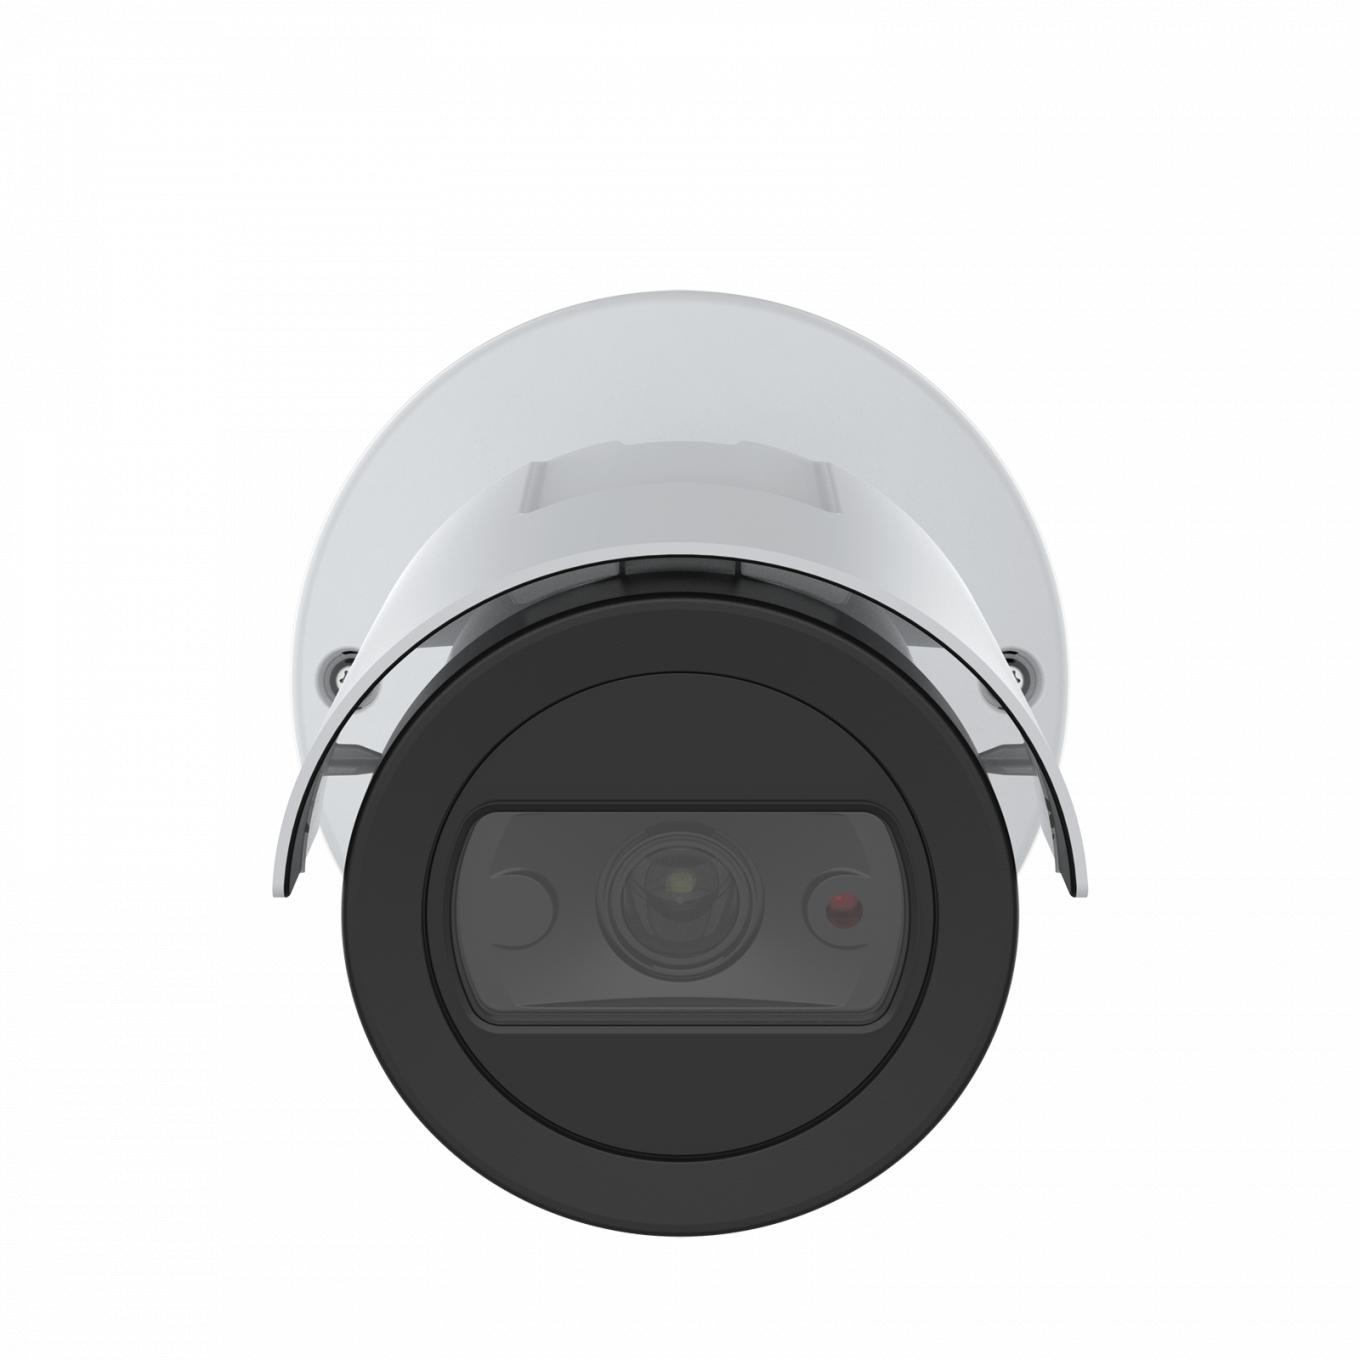 AXIS M2036-LE Bullet Camera | Axis Communications